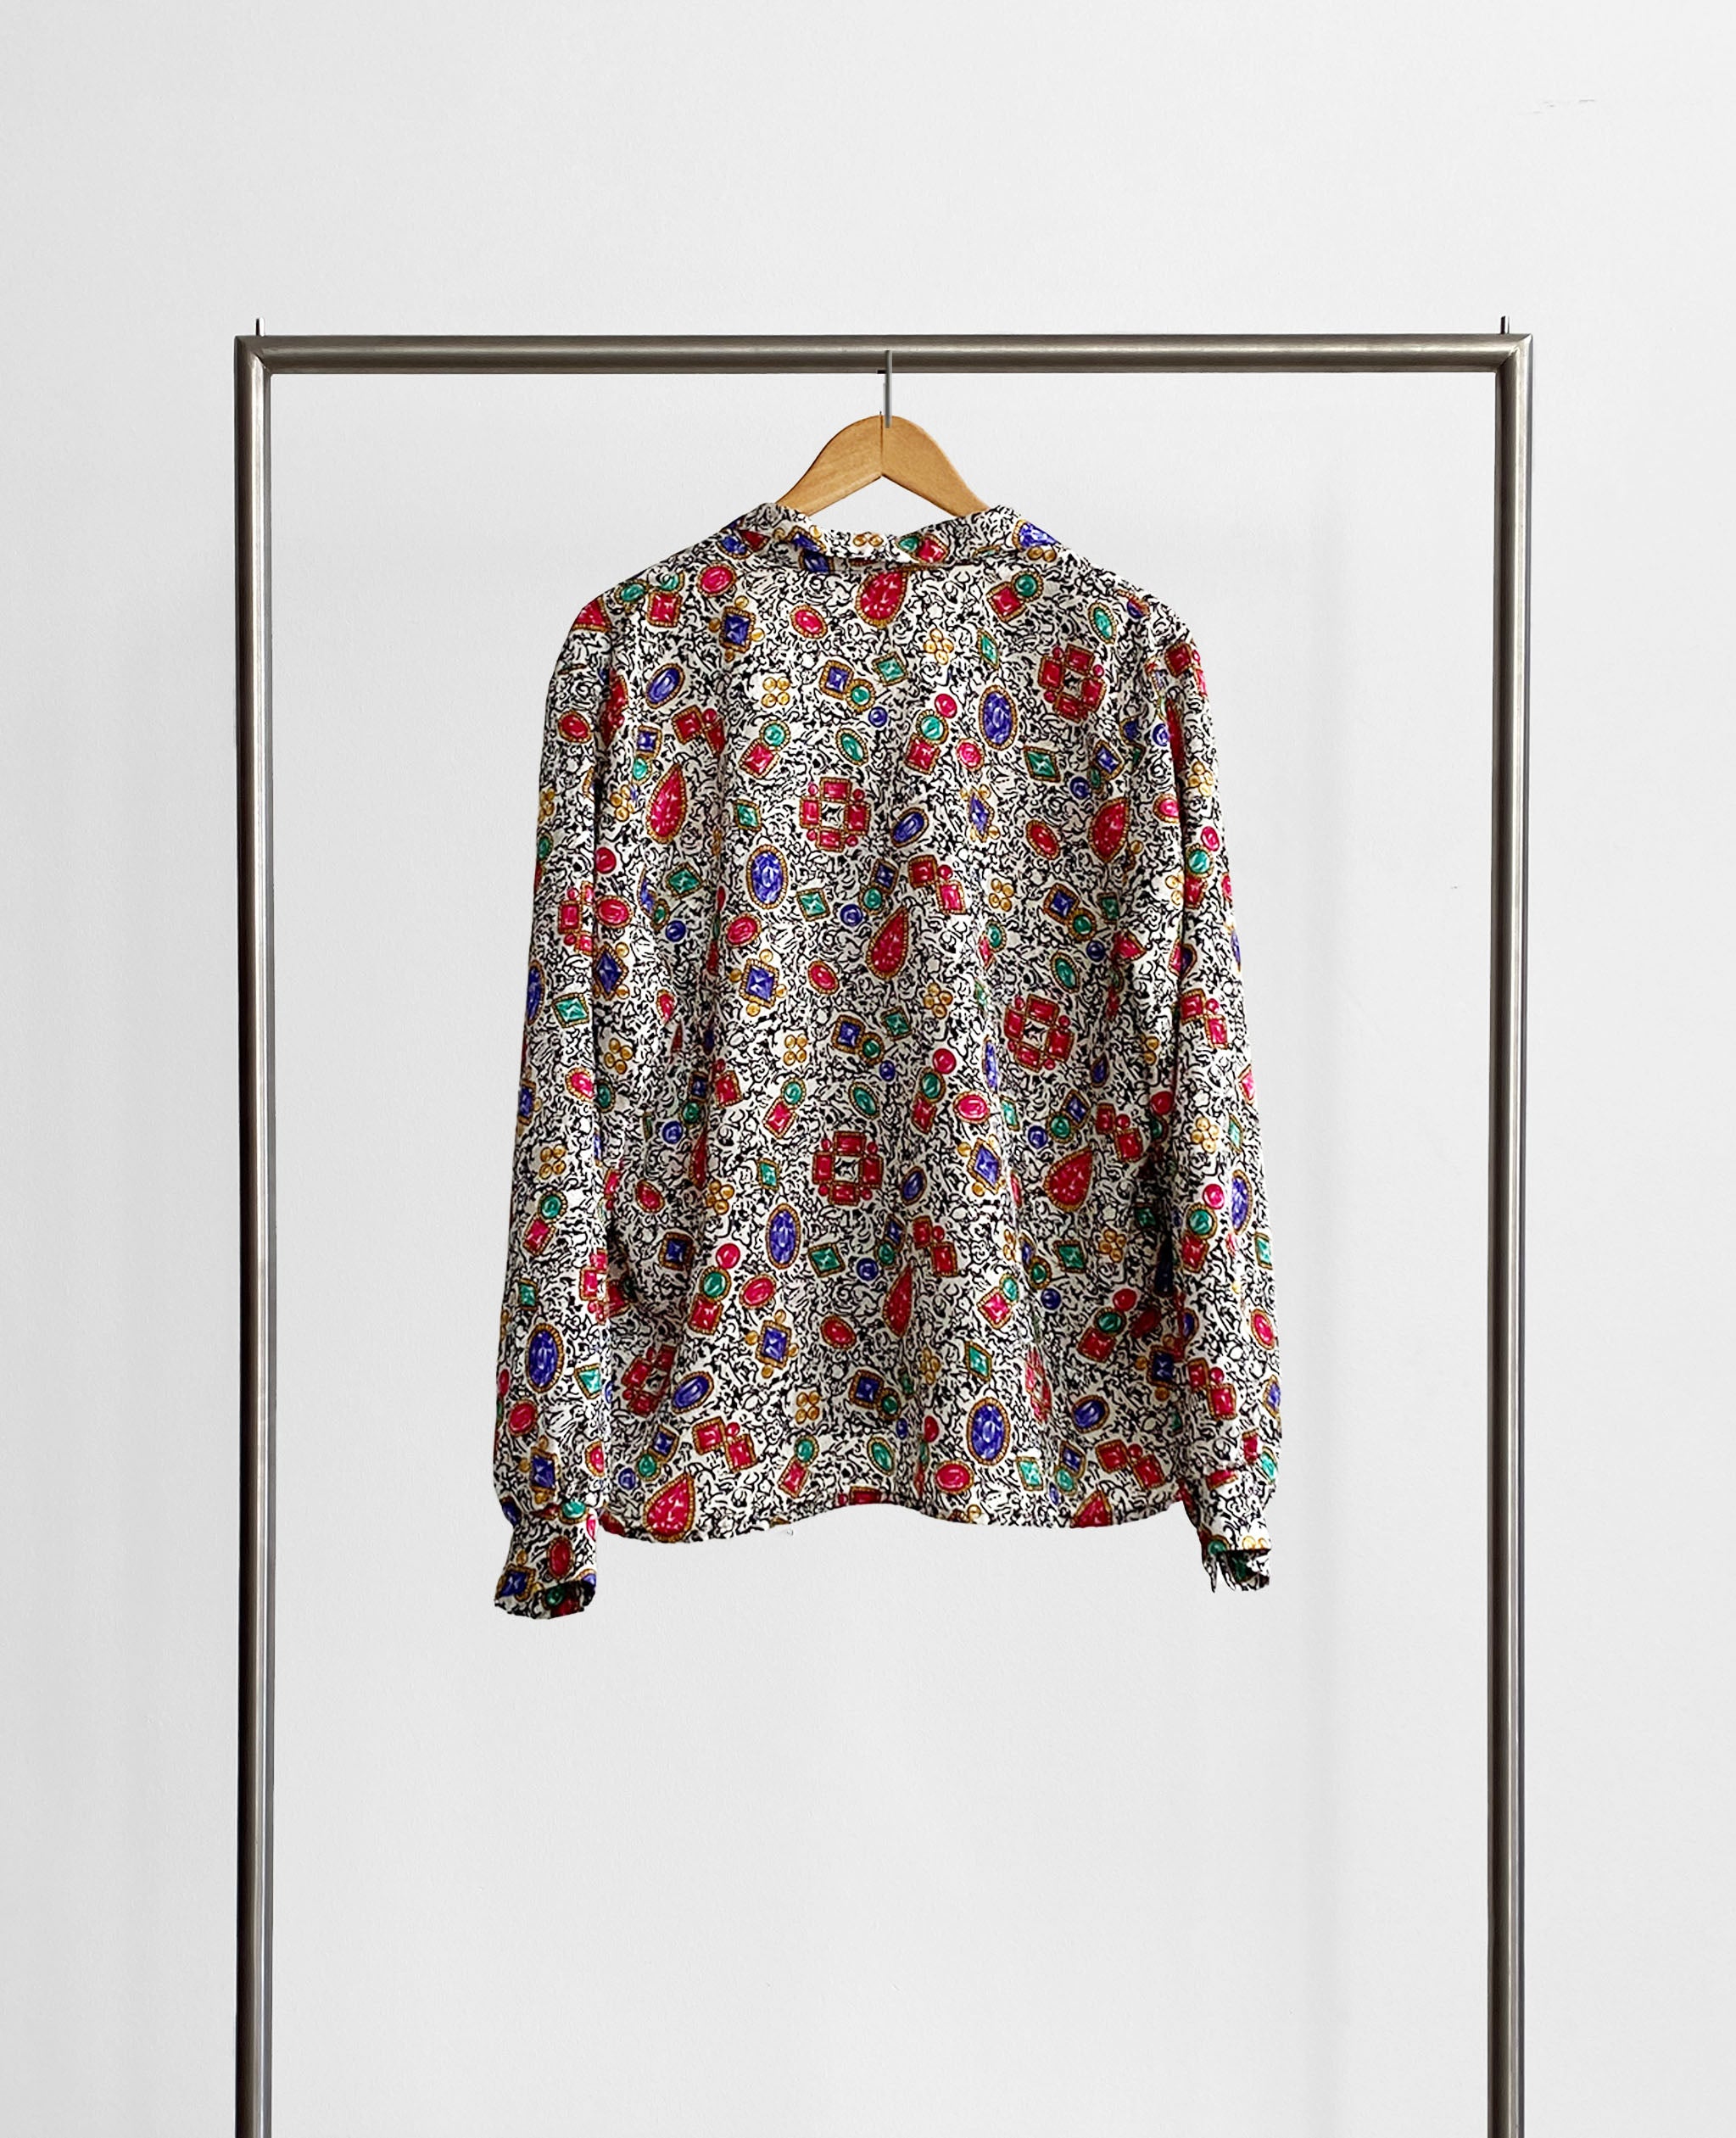 Jewels and Gems Patterned Blouse